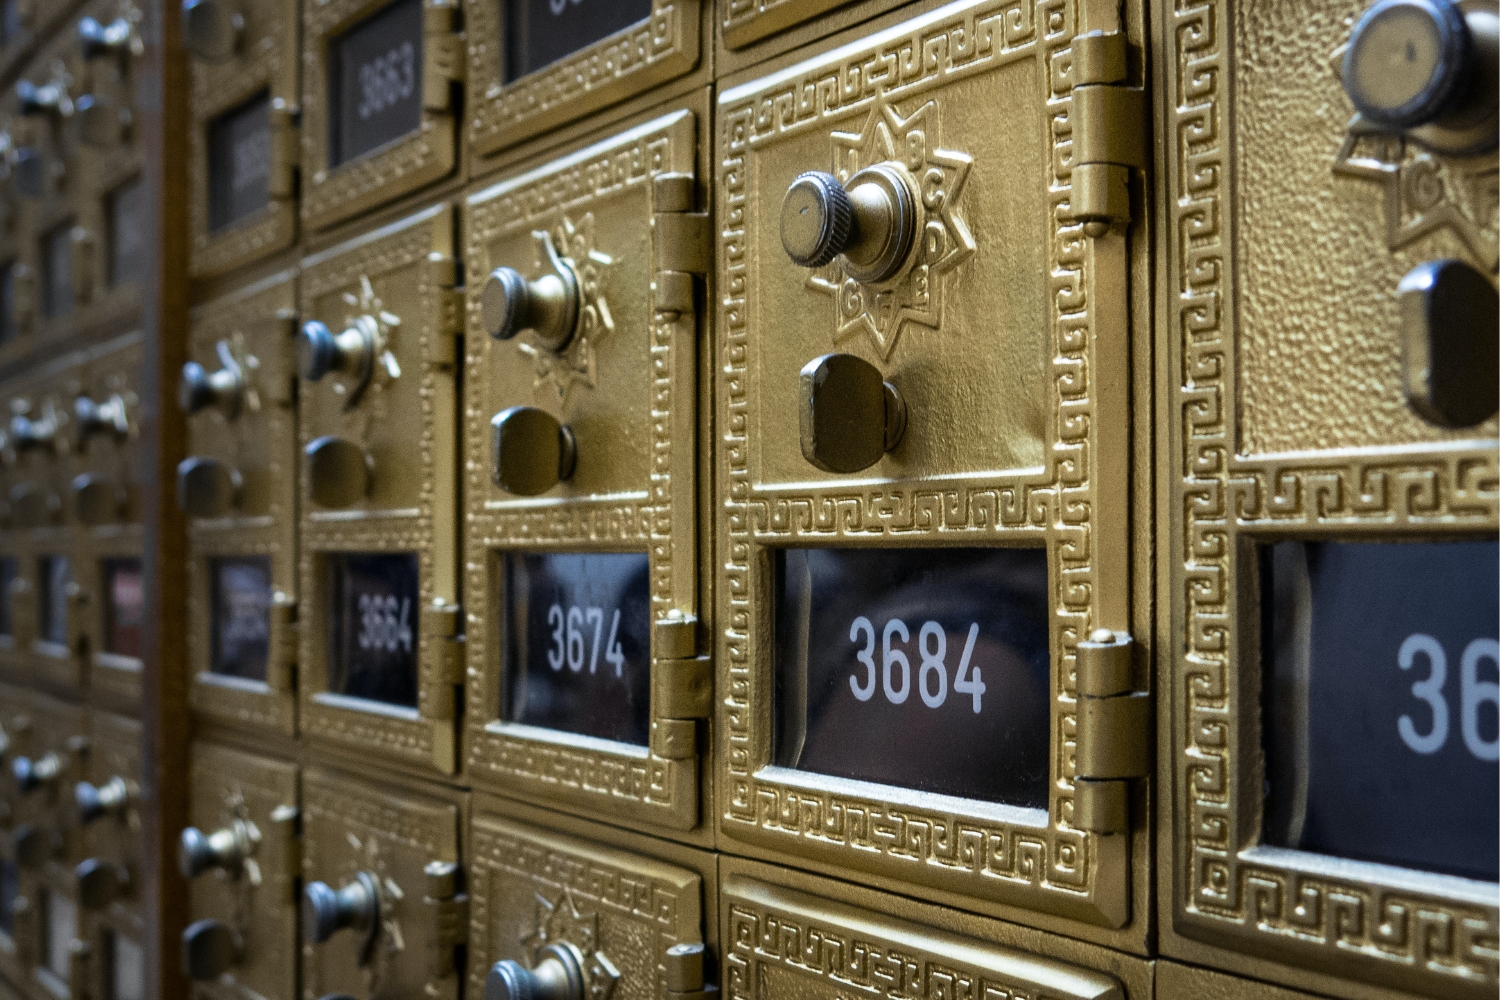 Image of old mail boxes at a post office